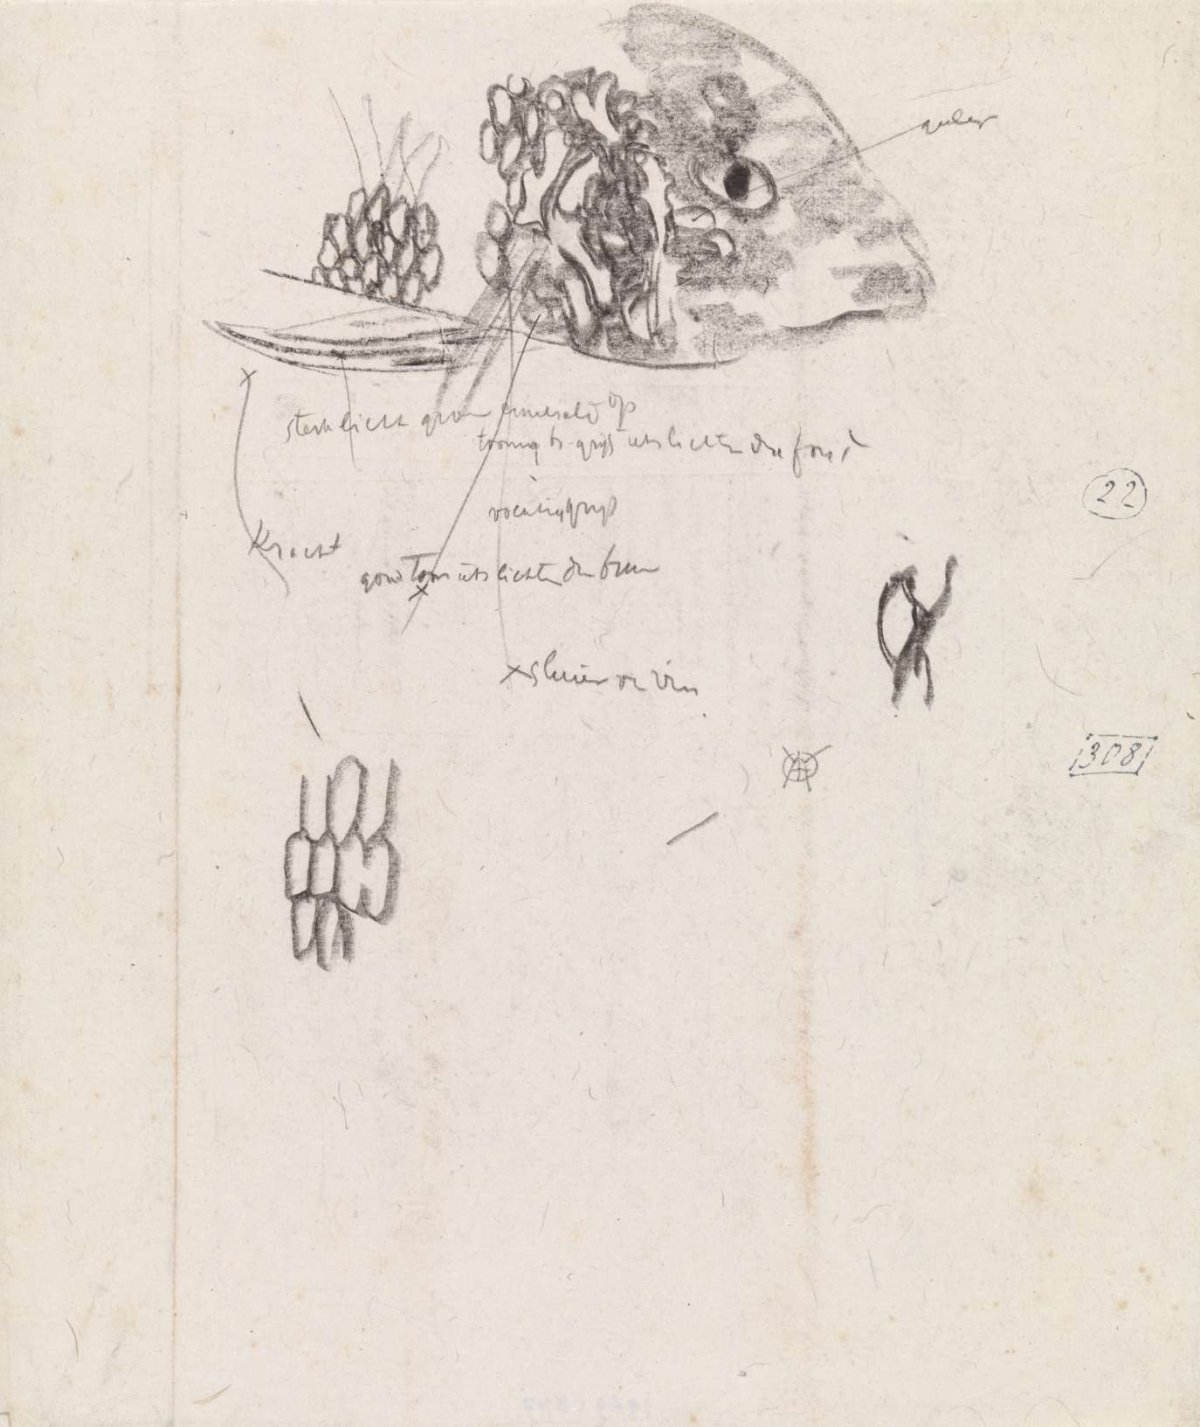 Study of the head and scales of a fish, with color notes, Gerrit Willem Dijsselhof, 1876 - 1924